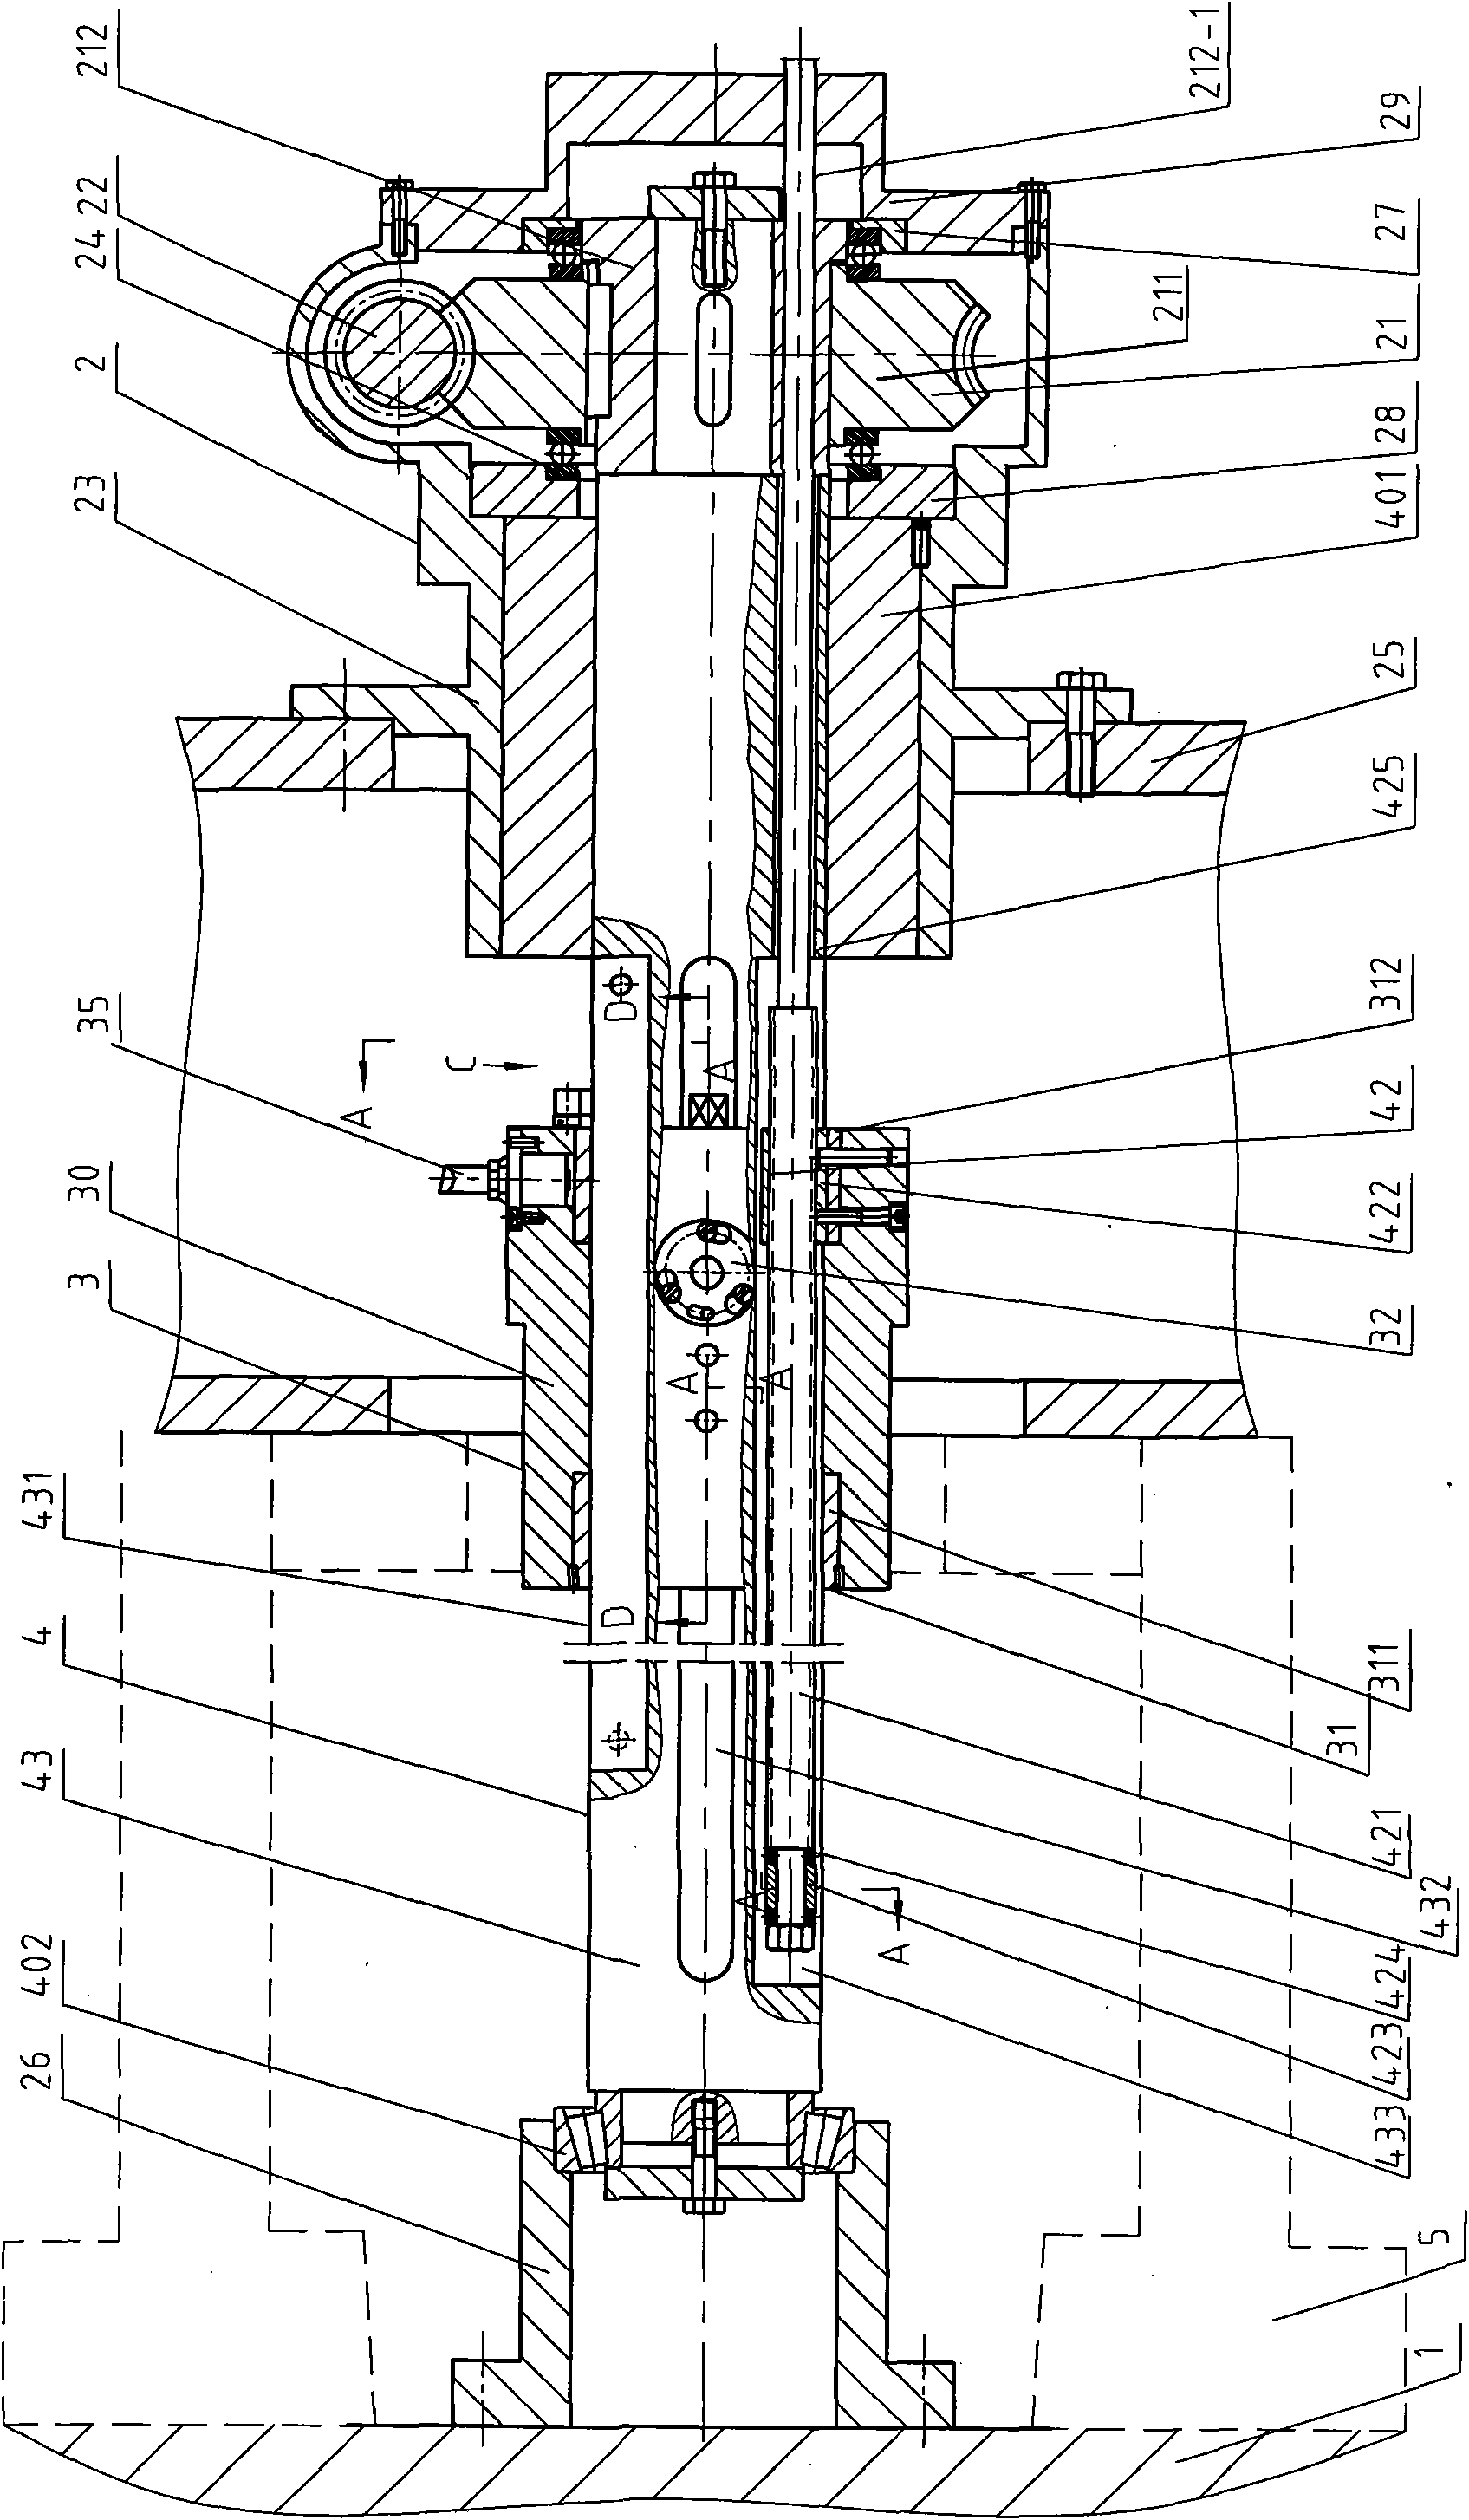 Boring device for cylinder hole of diesel engine stand